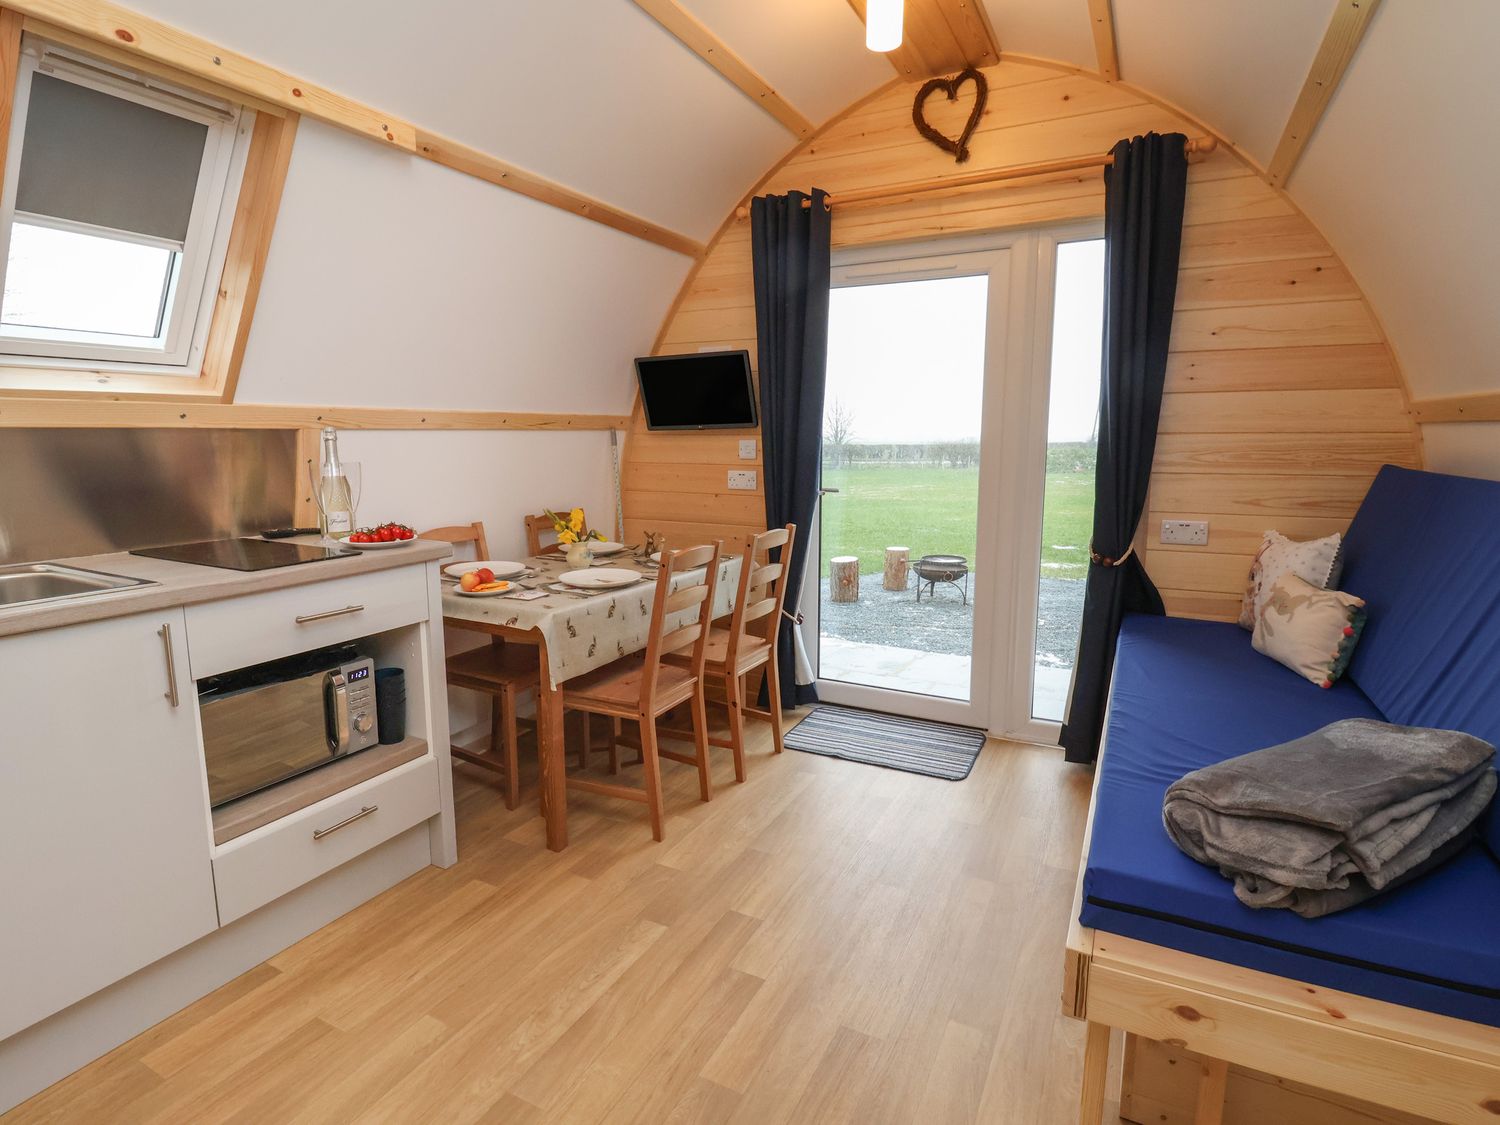 Bevy near Bridlington, Yorkshire, studio-style layout countryside views, barbecue, romantic, parking